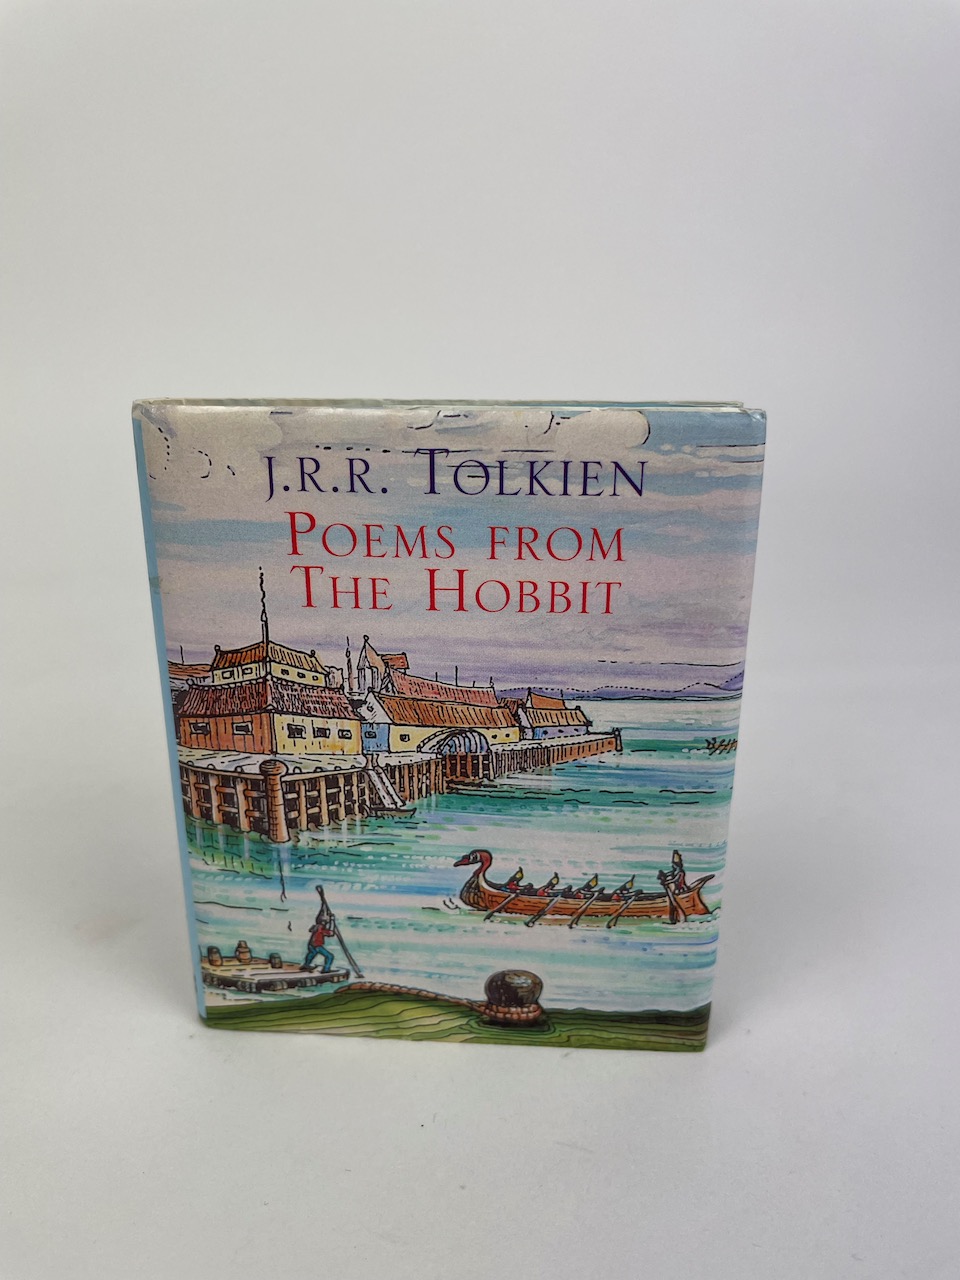 Poems from the Hobbit miniature book illustrated by Tolkien